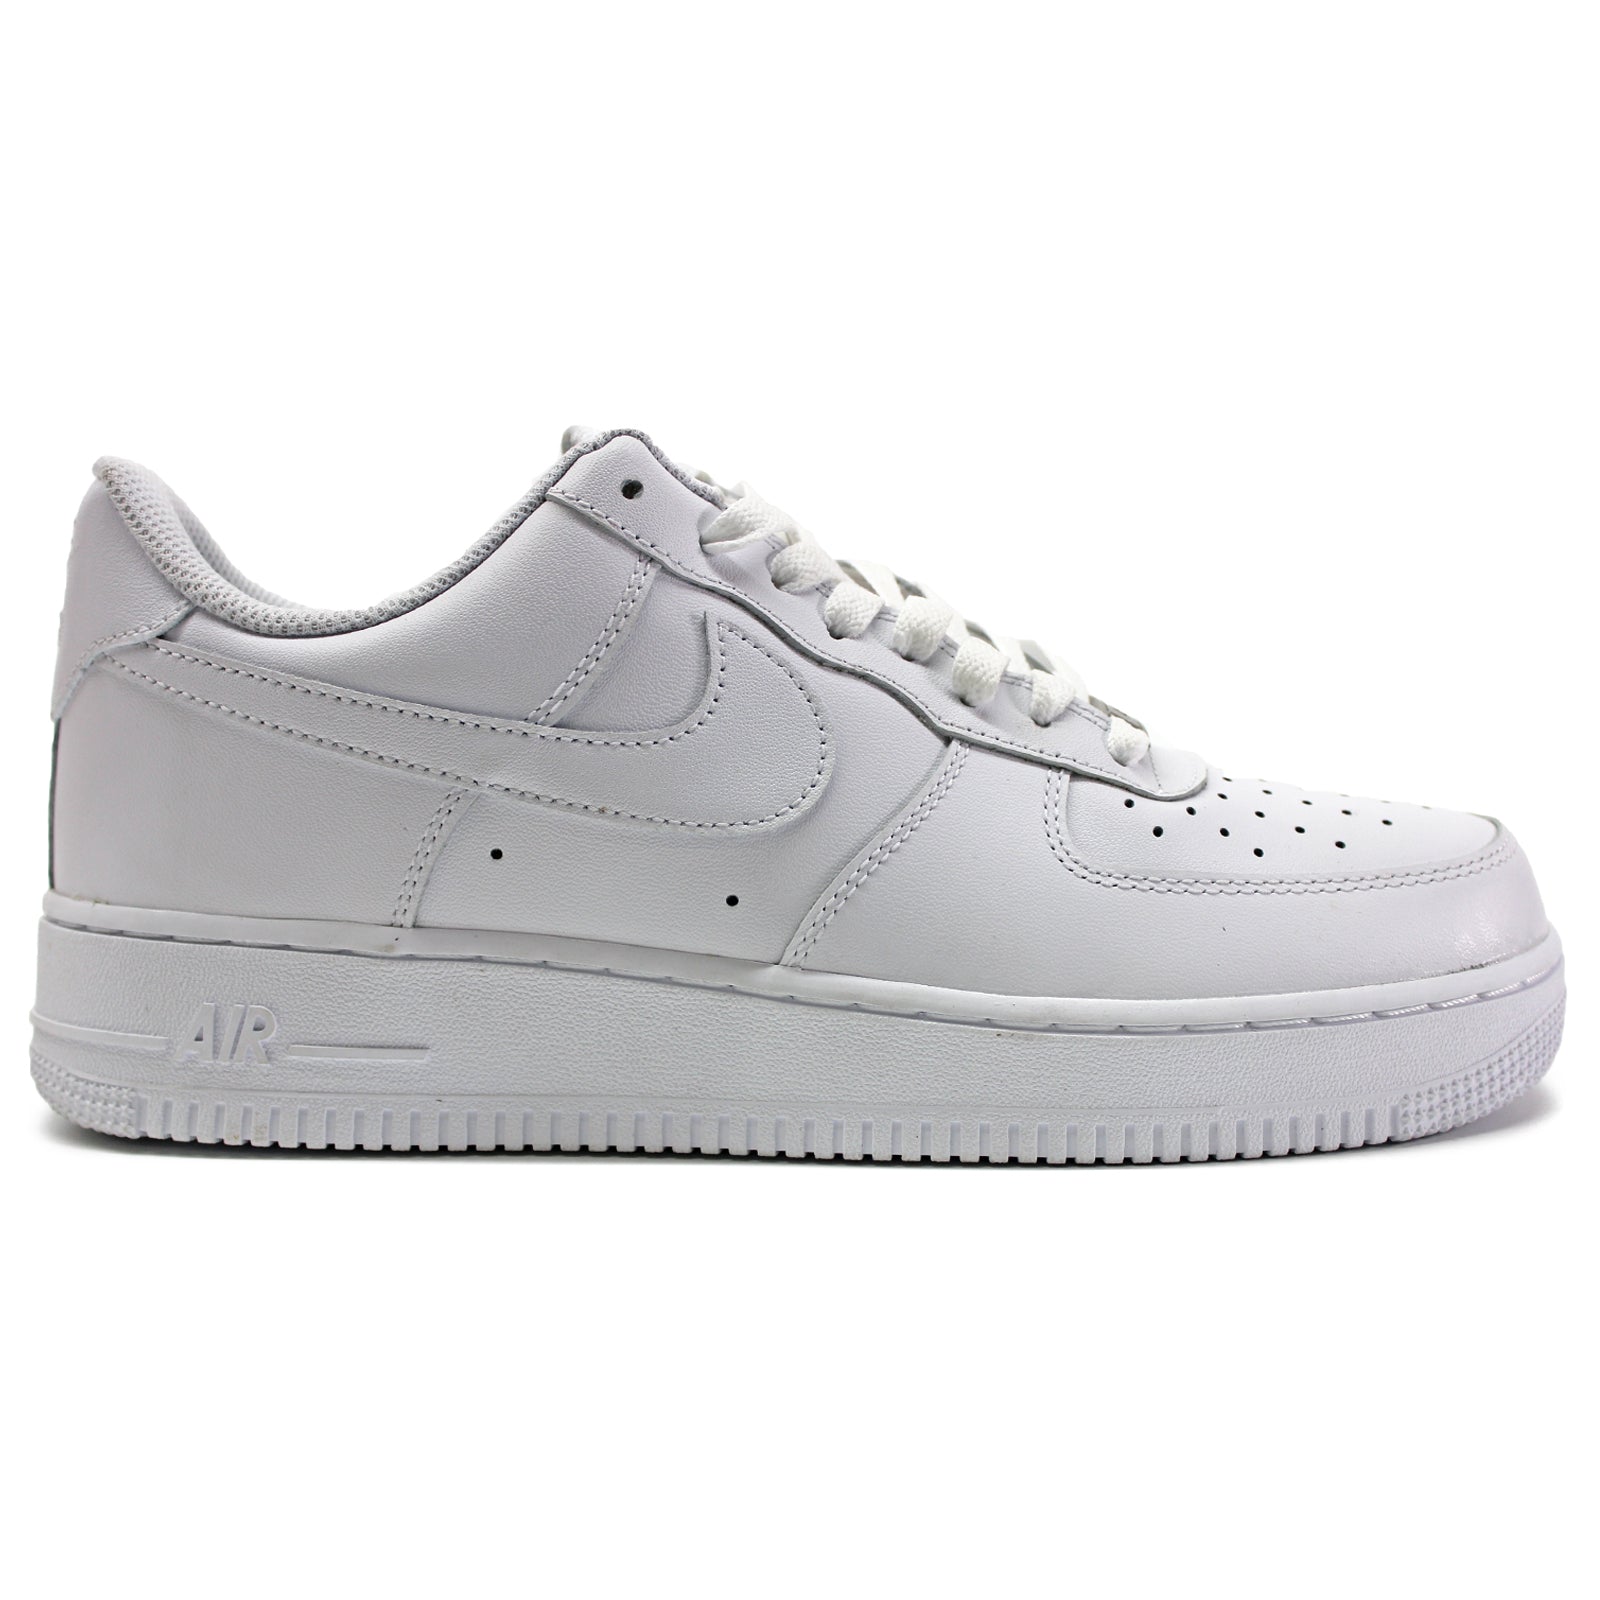 Nike Air Force I 07 White Lowtop Leather Mens Trainers - UK 9